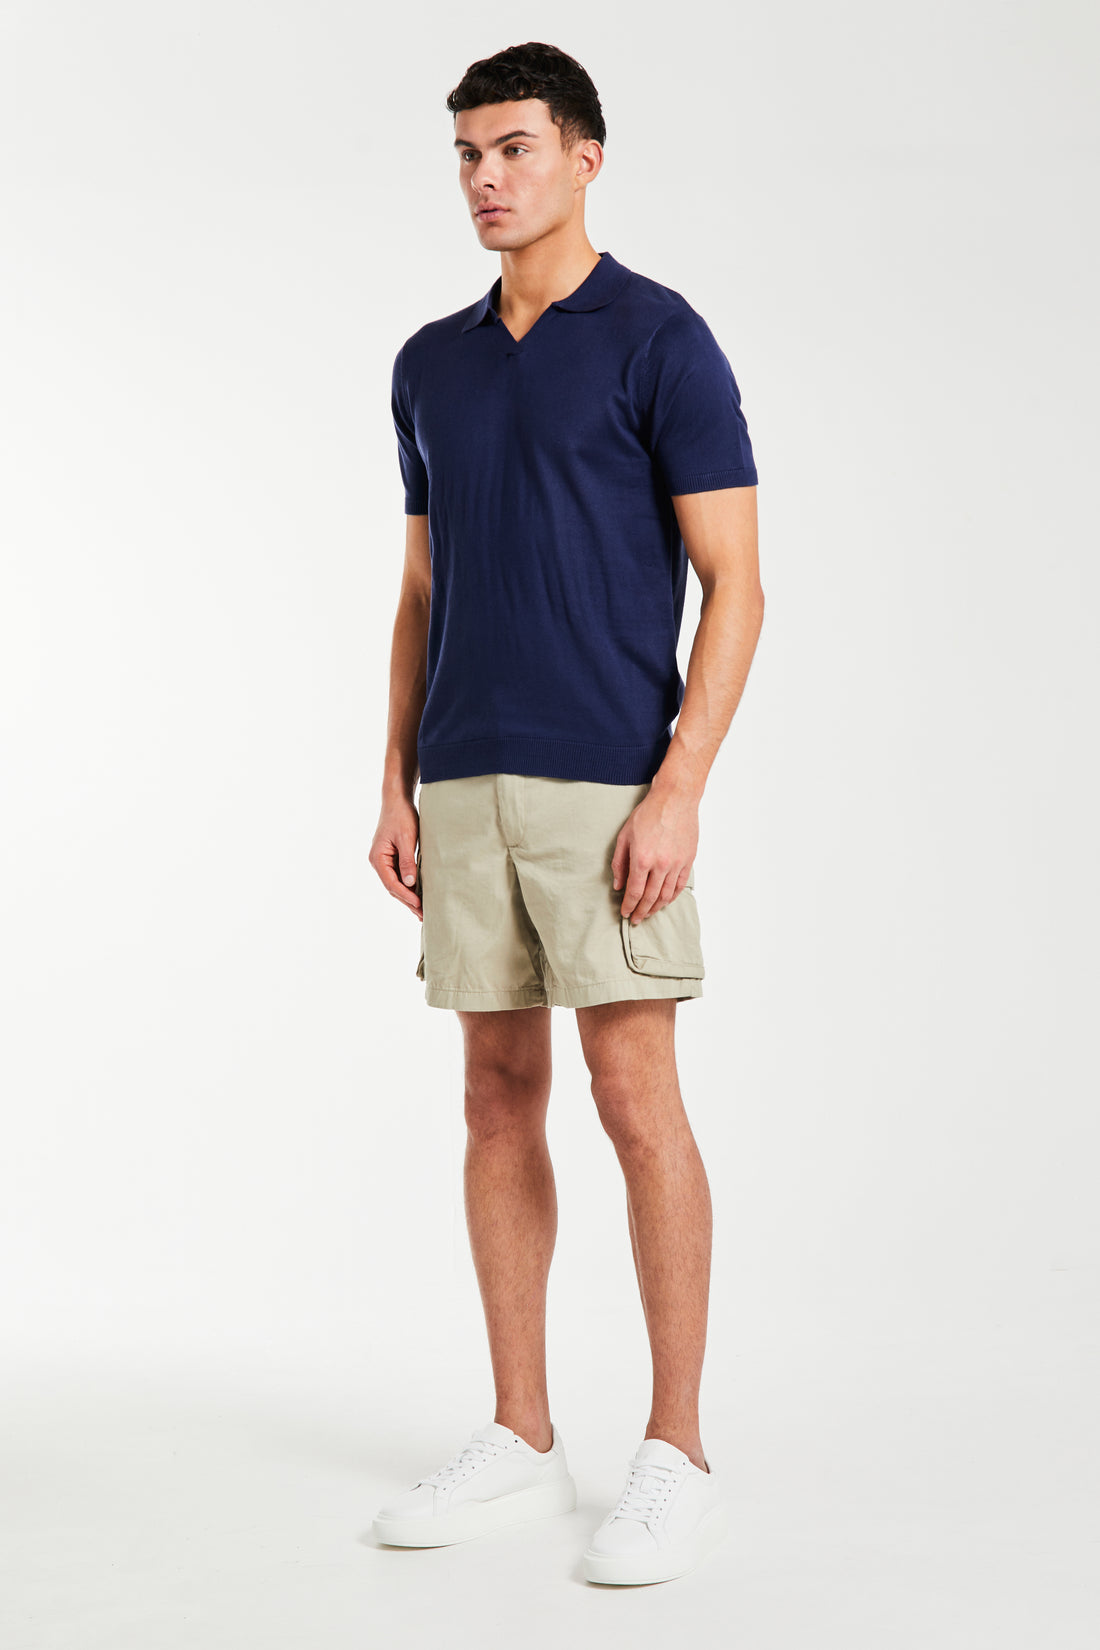 Knitted polo in dark blue styled with shorts